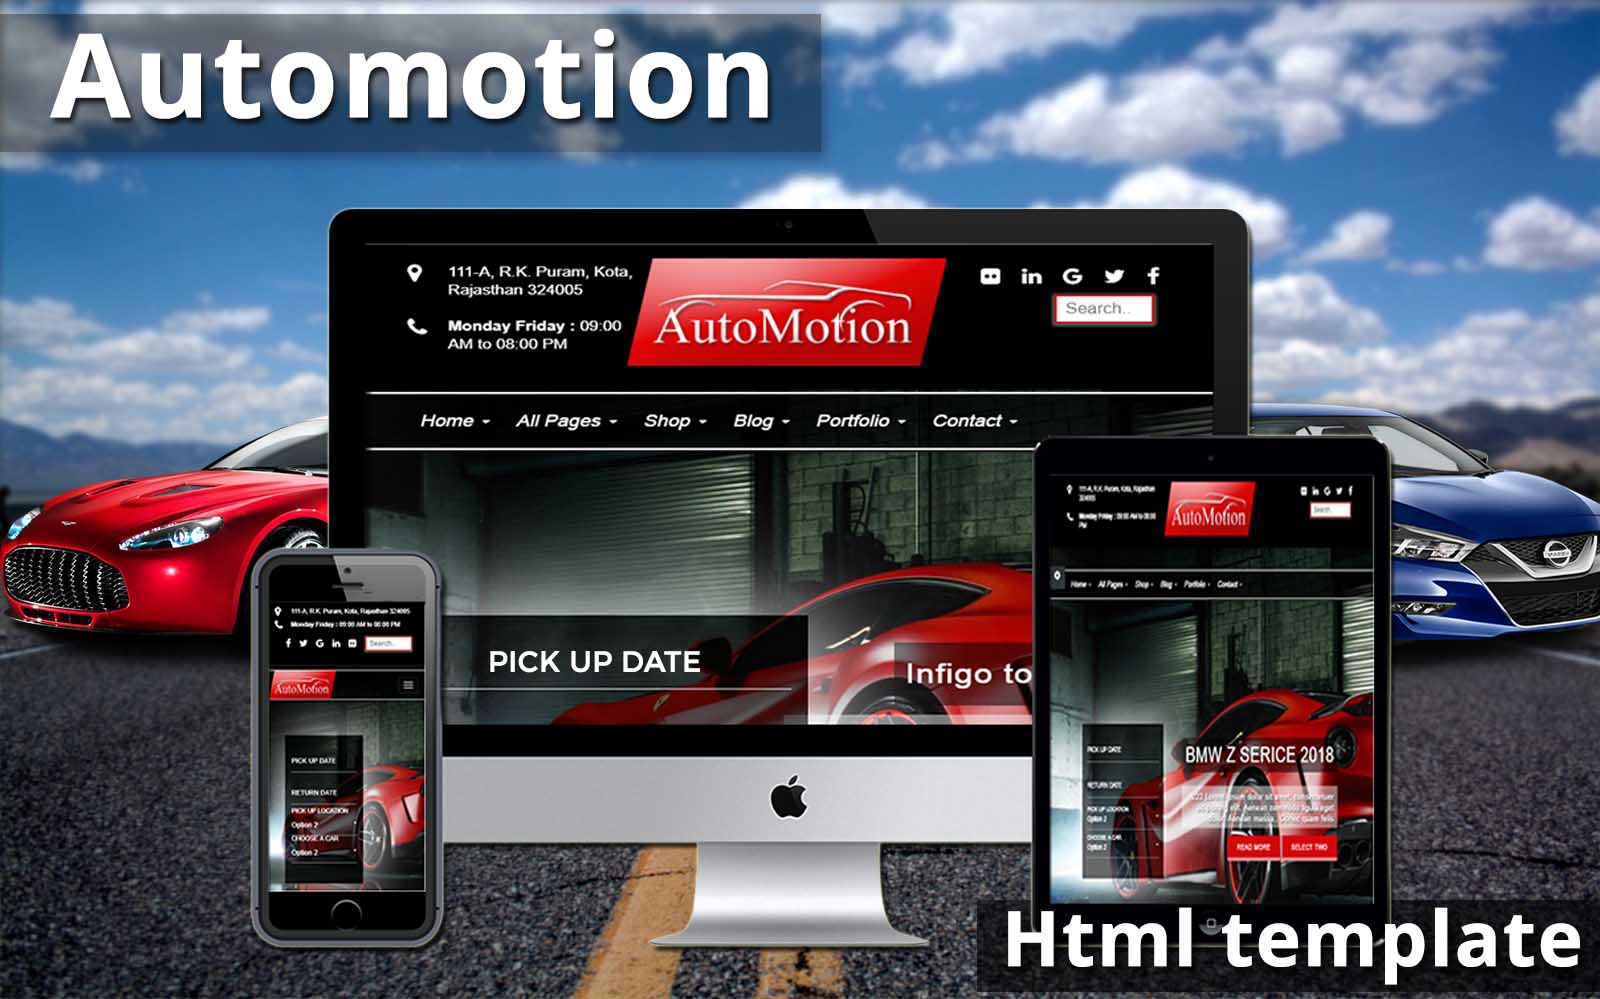 automotion html template